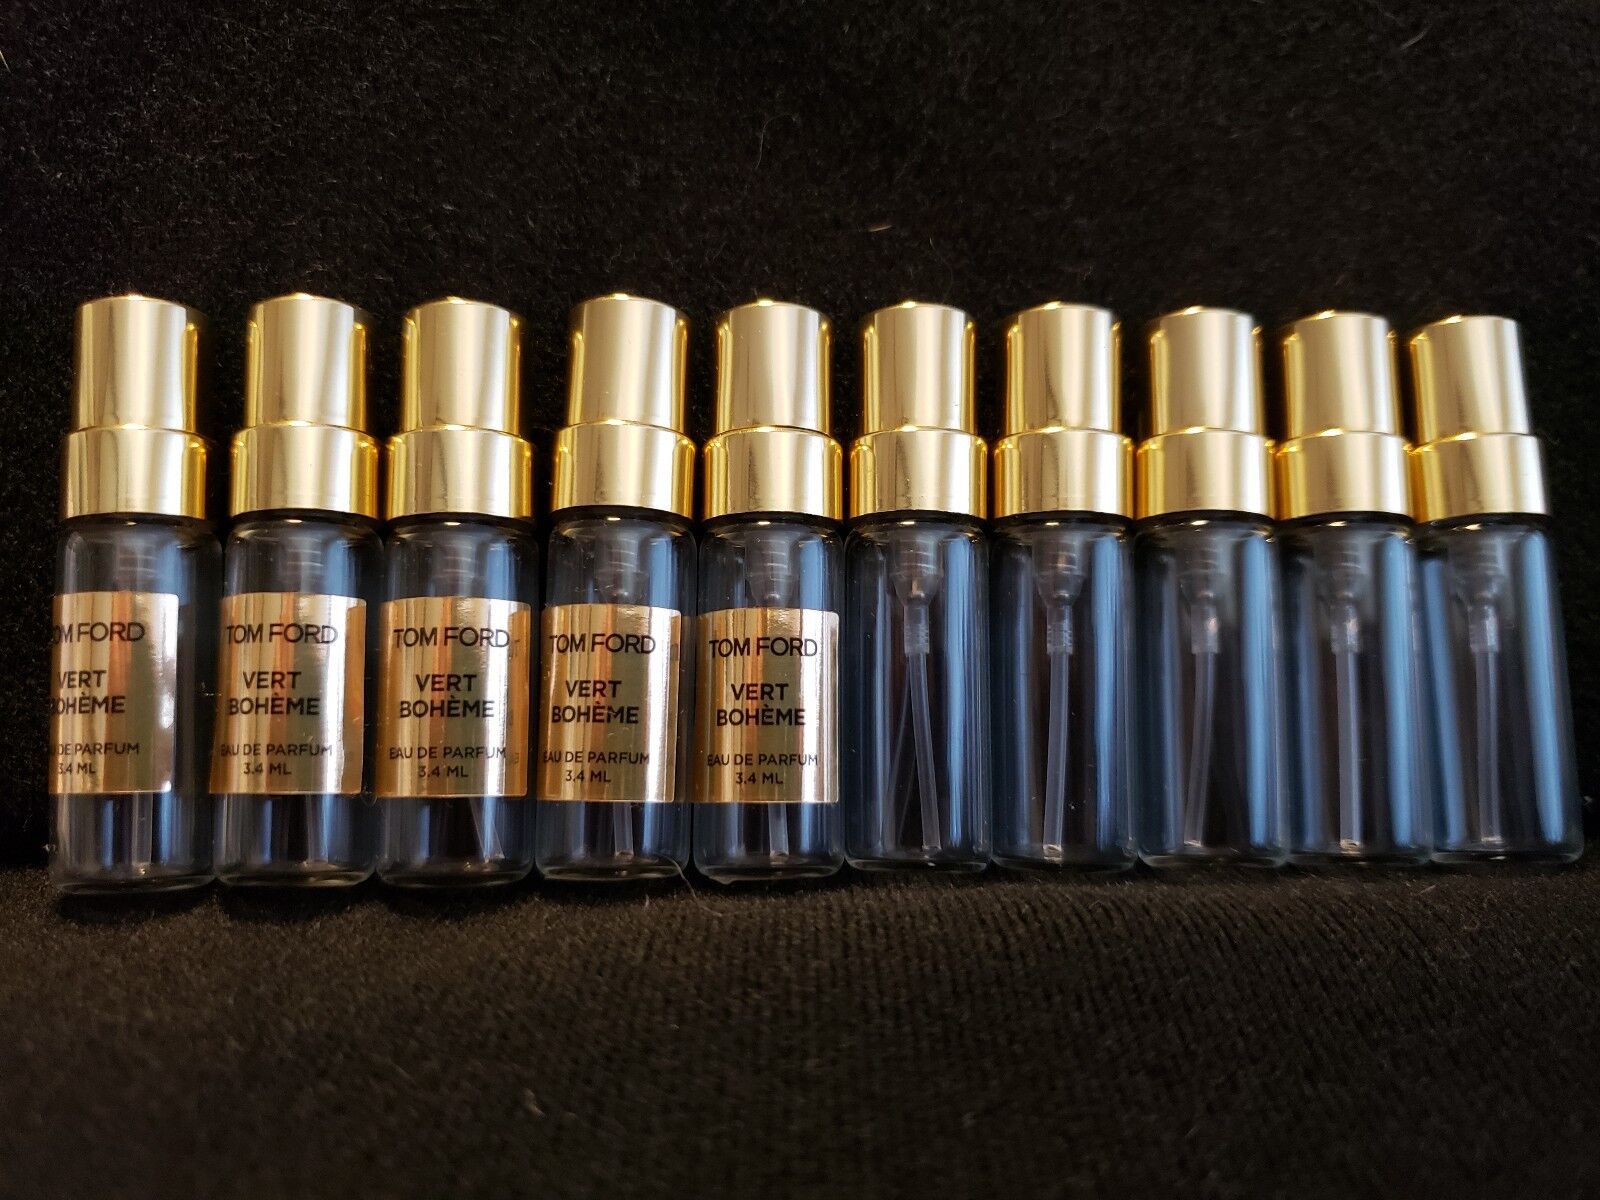 Lot of 28 Tom Ford Empty Challenge the lowest price Japan store ☆ Refillable 3.4 Atomizer Glass Perfume